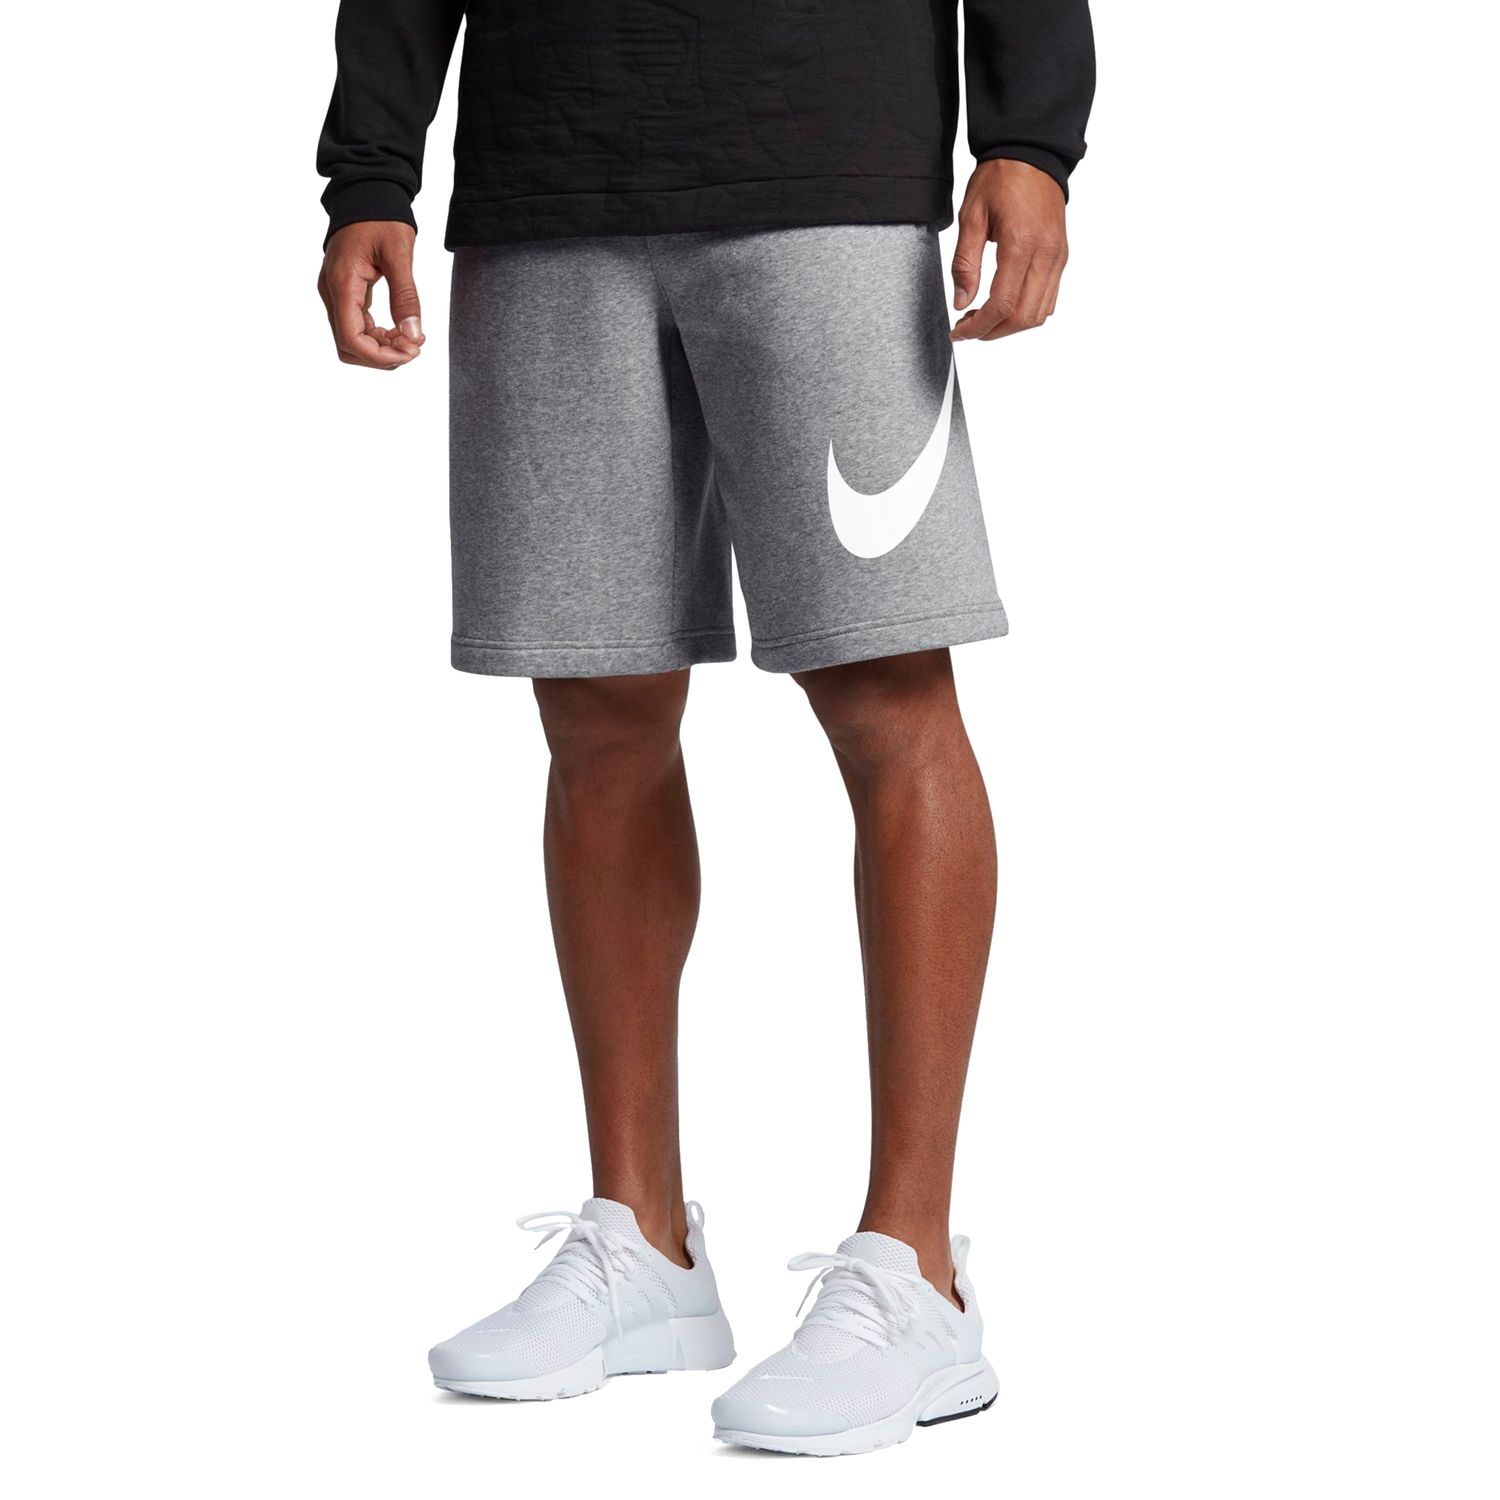 nike sweat shorts jcpenney